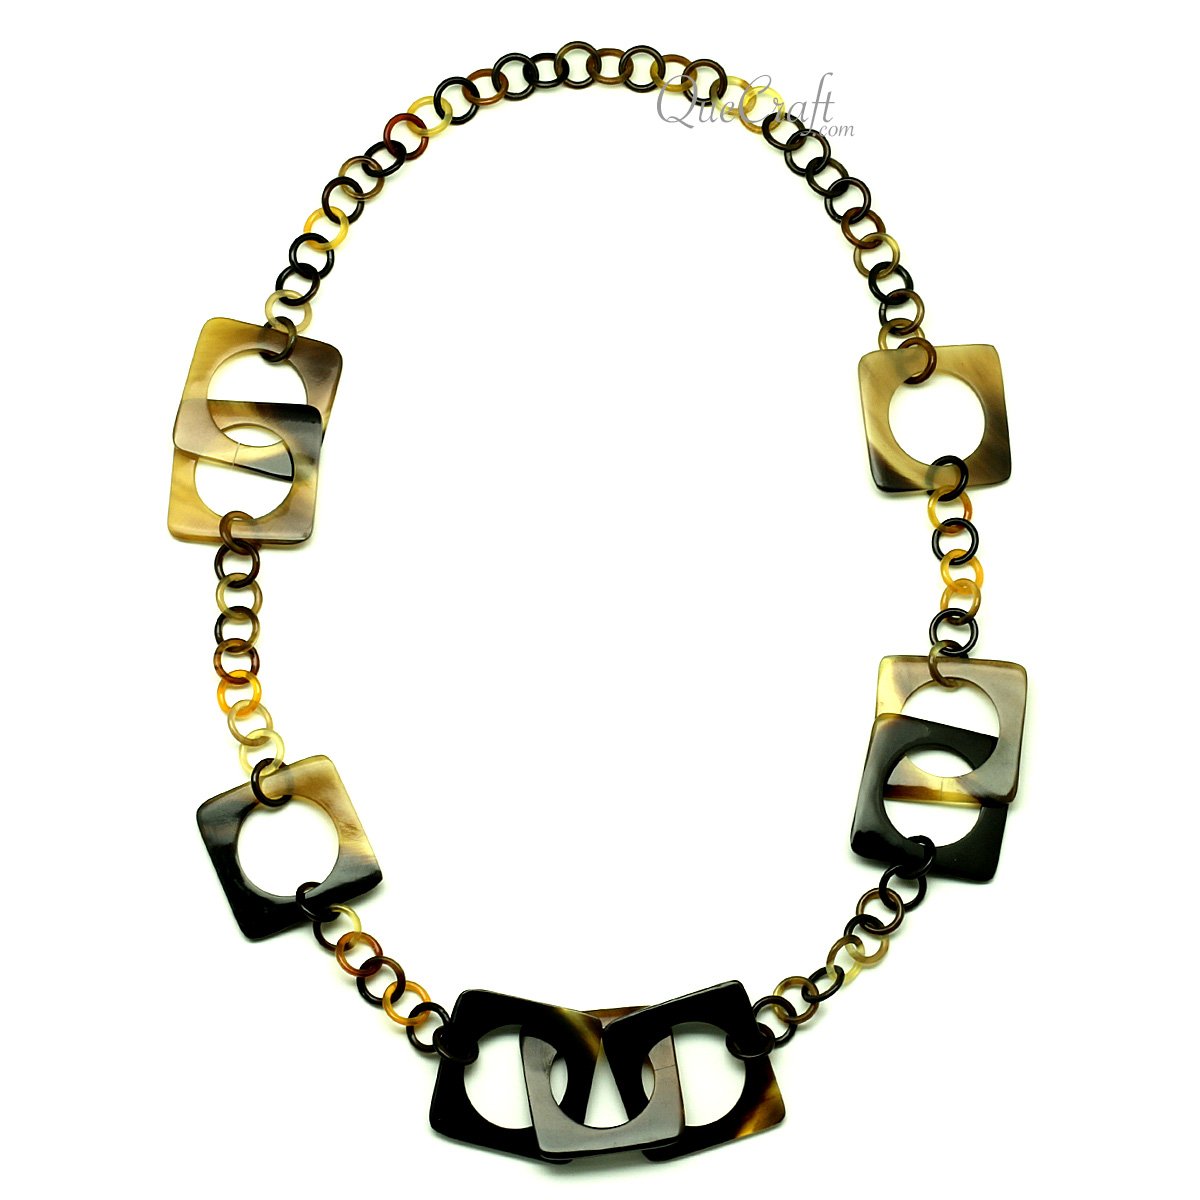 Horn Chain Necklace #13014 - HORN JEWELRY